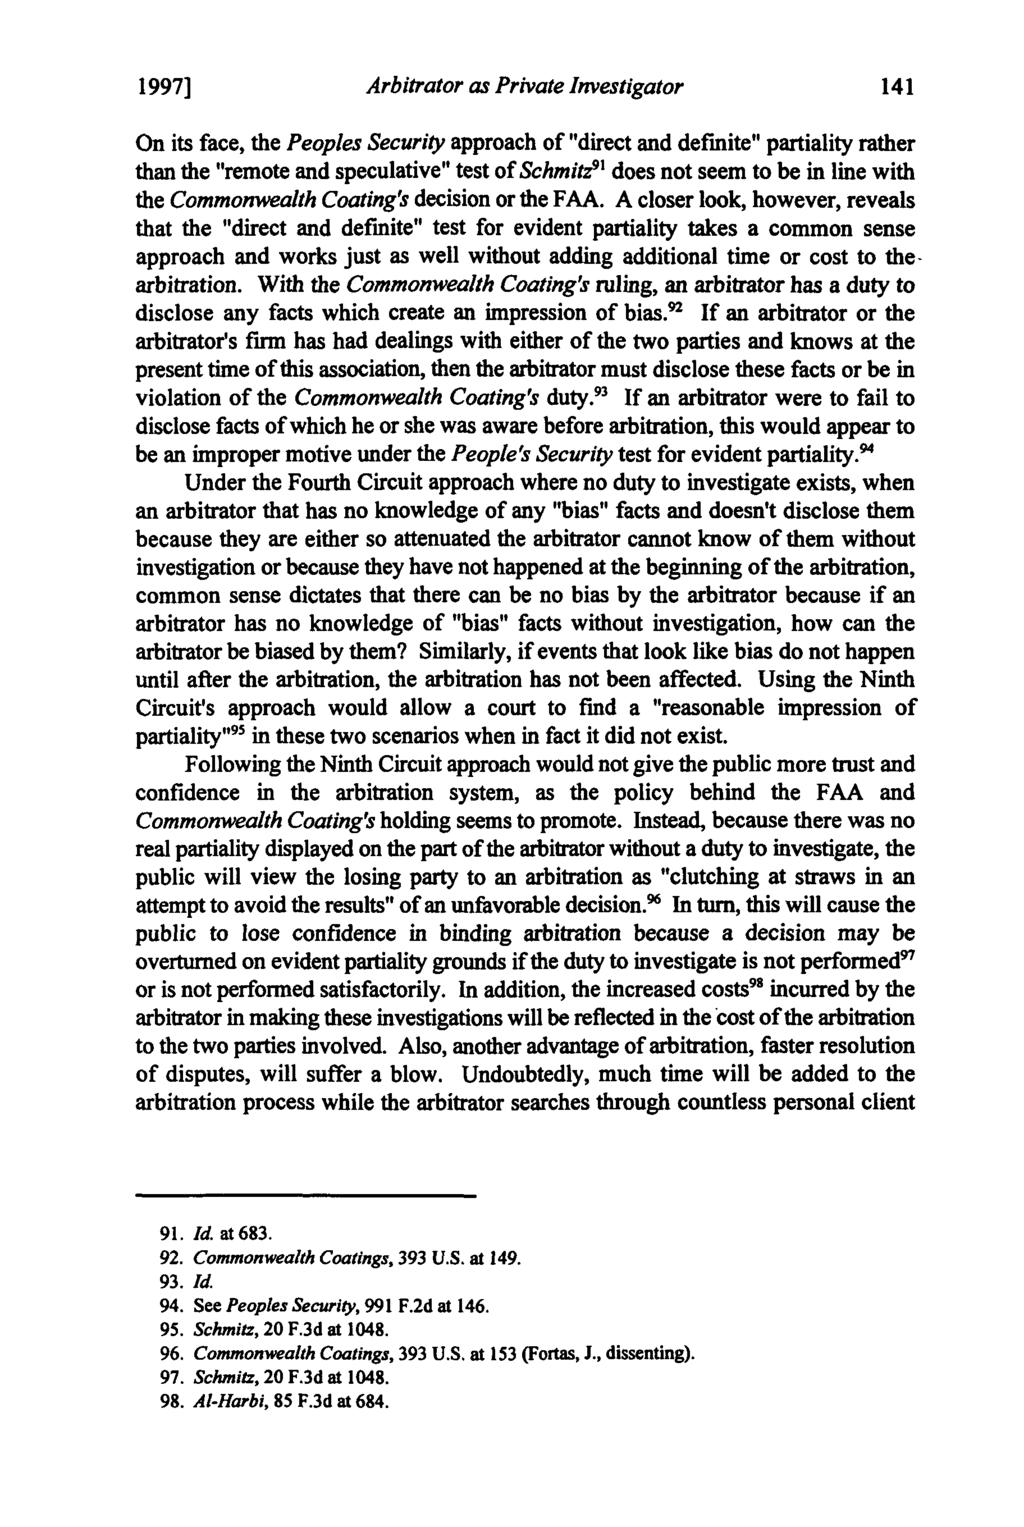 1997] Jacobs: Jacobs: Arbitrator or Private Investigator: Arbitrator as Private Investigator On its face, the Peoples Security approach of "direct and definite" partiality rather than the "remote and